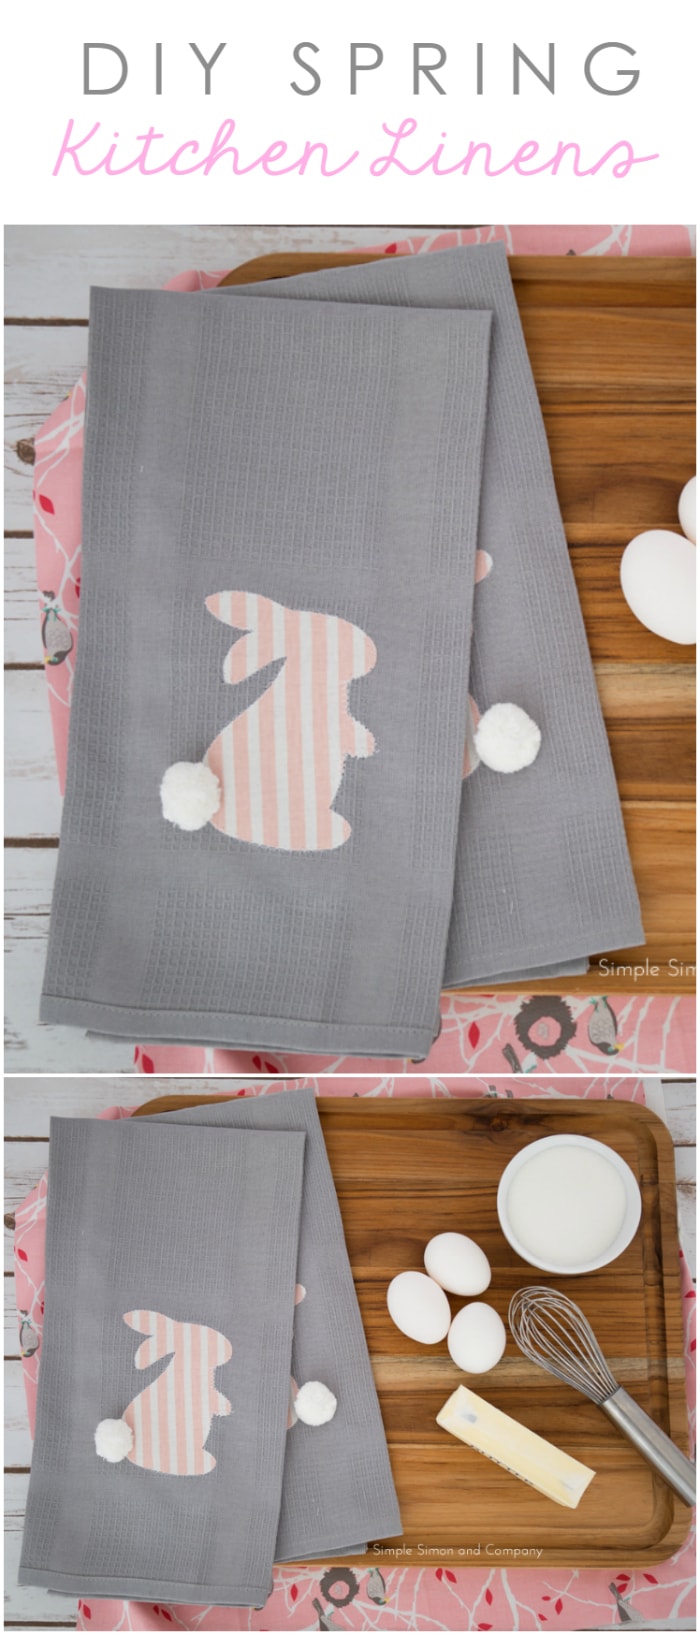 40 Easter Sewing Projects & Ideas - Page 2 of 2 - The ...